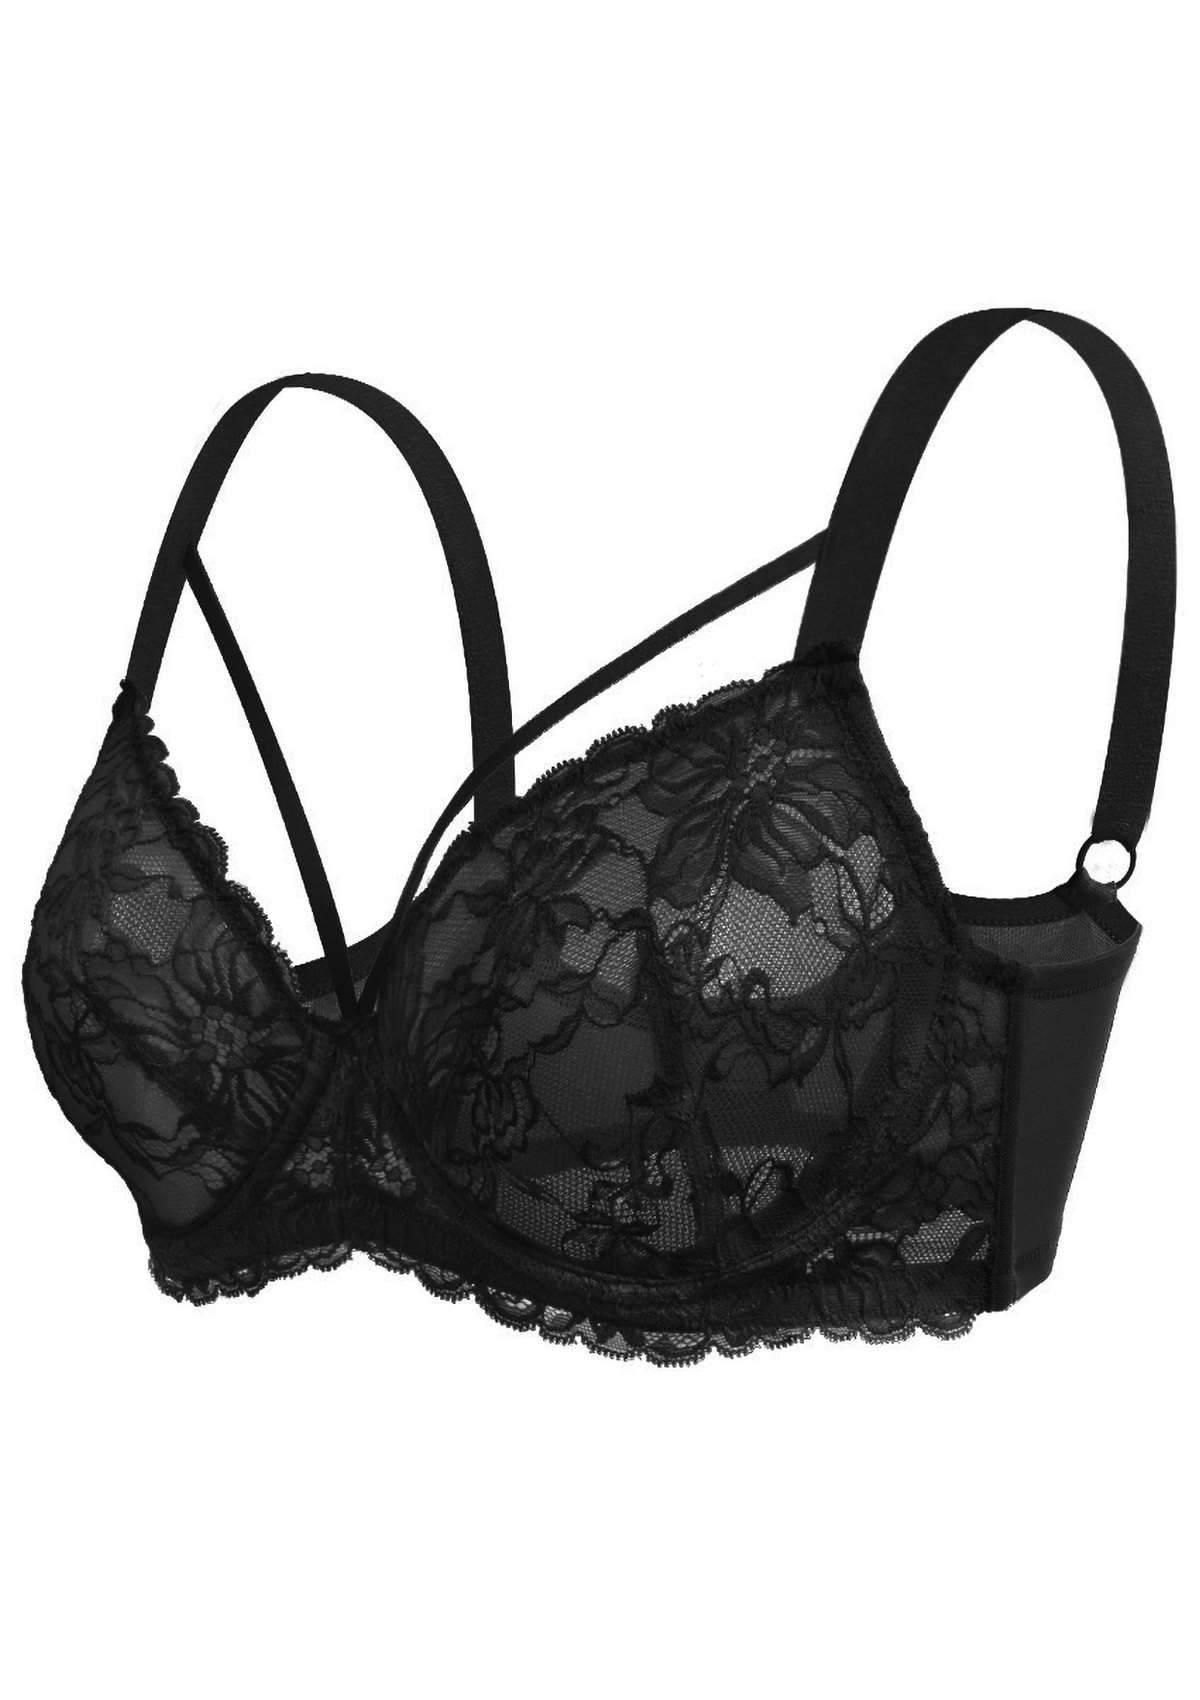 HSIA Pretty In Petals Bra - Plus Size Lingerie For Comfrot And Support - Black / 42 / DDD/F